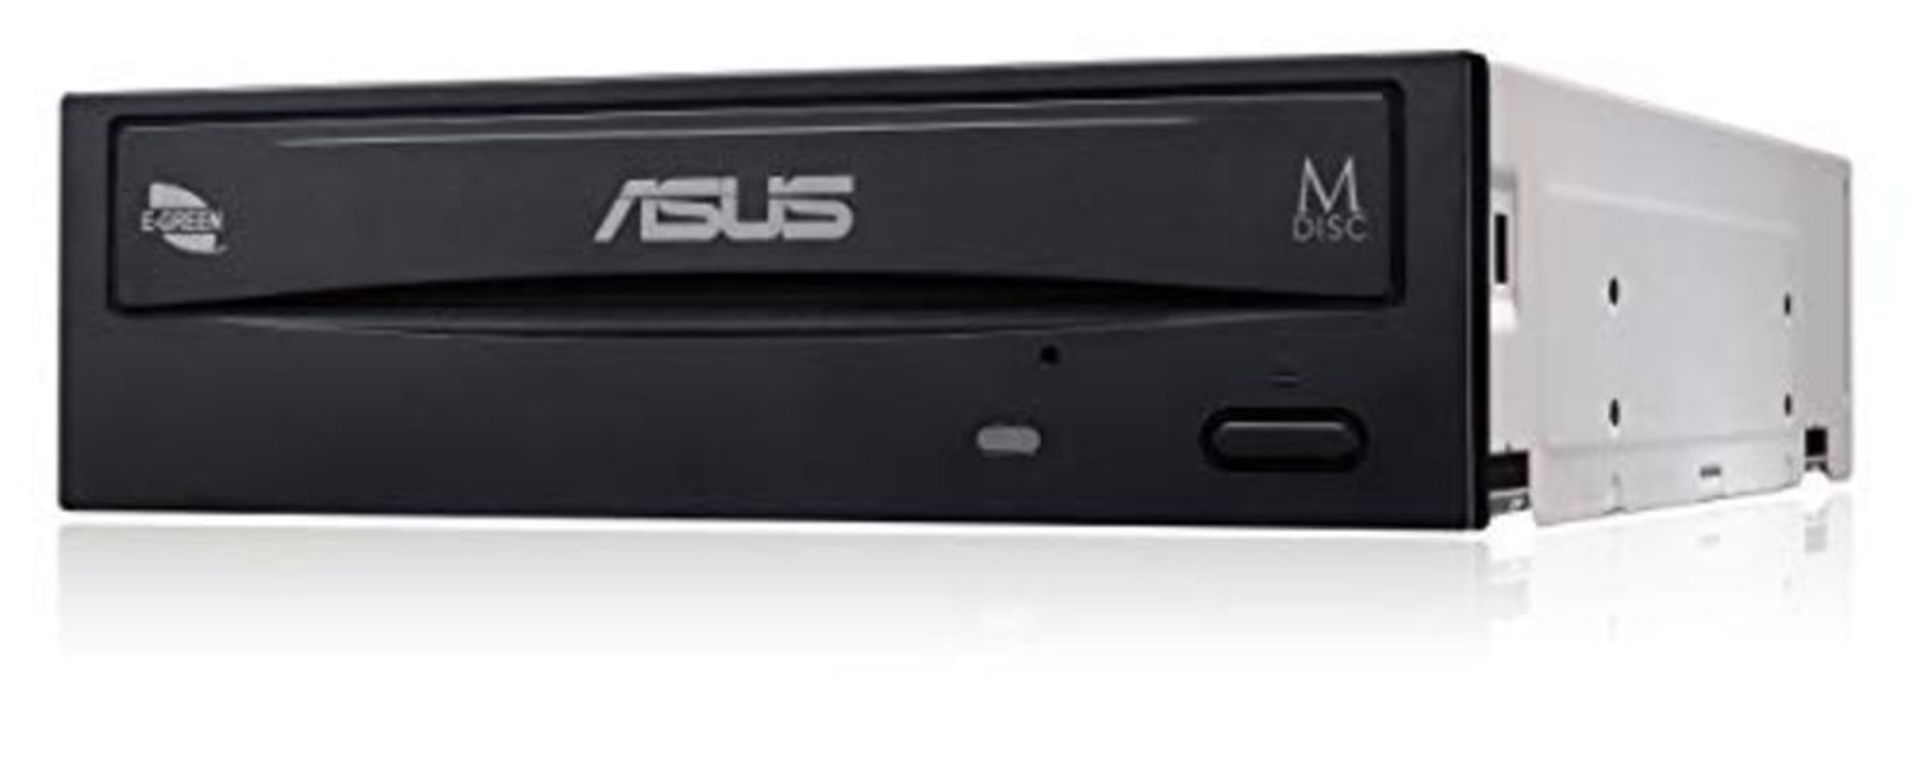 ASUS DRW-24D5MT 24X DVD writer, M-DISC support, Disc Encryption, Unlimited Webstorage(